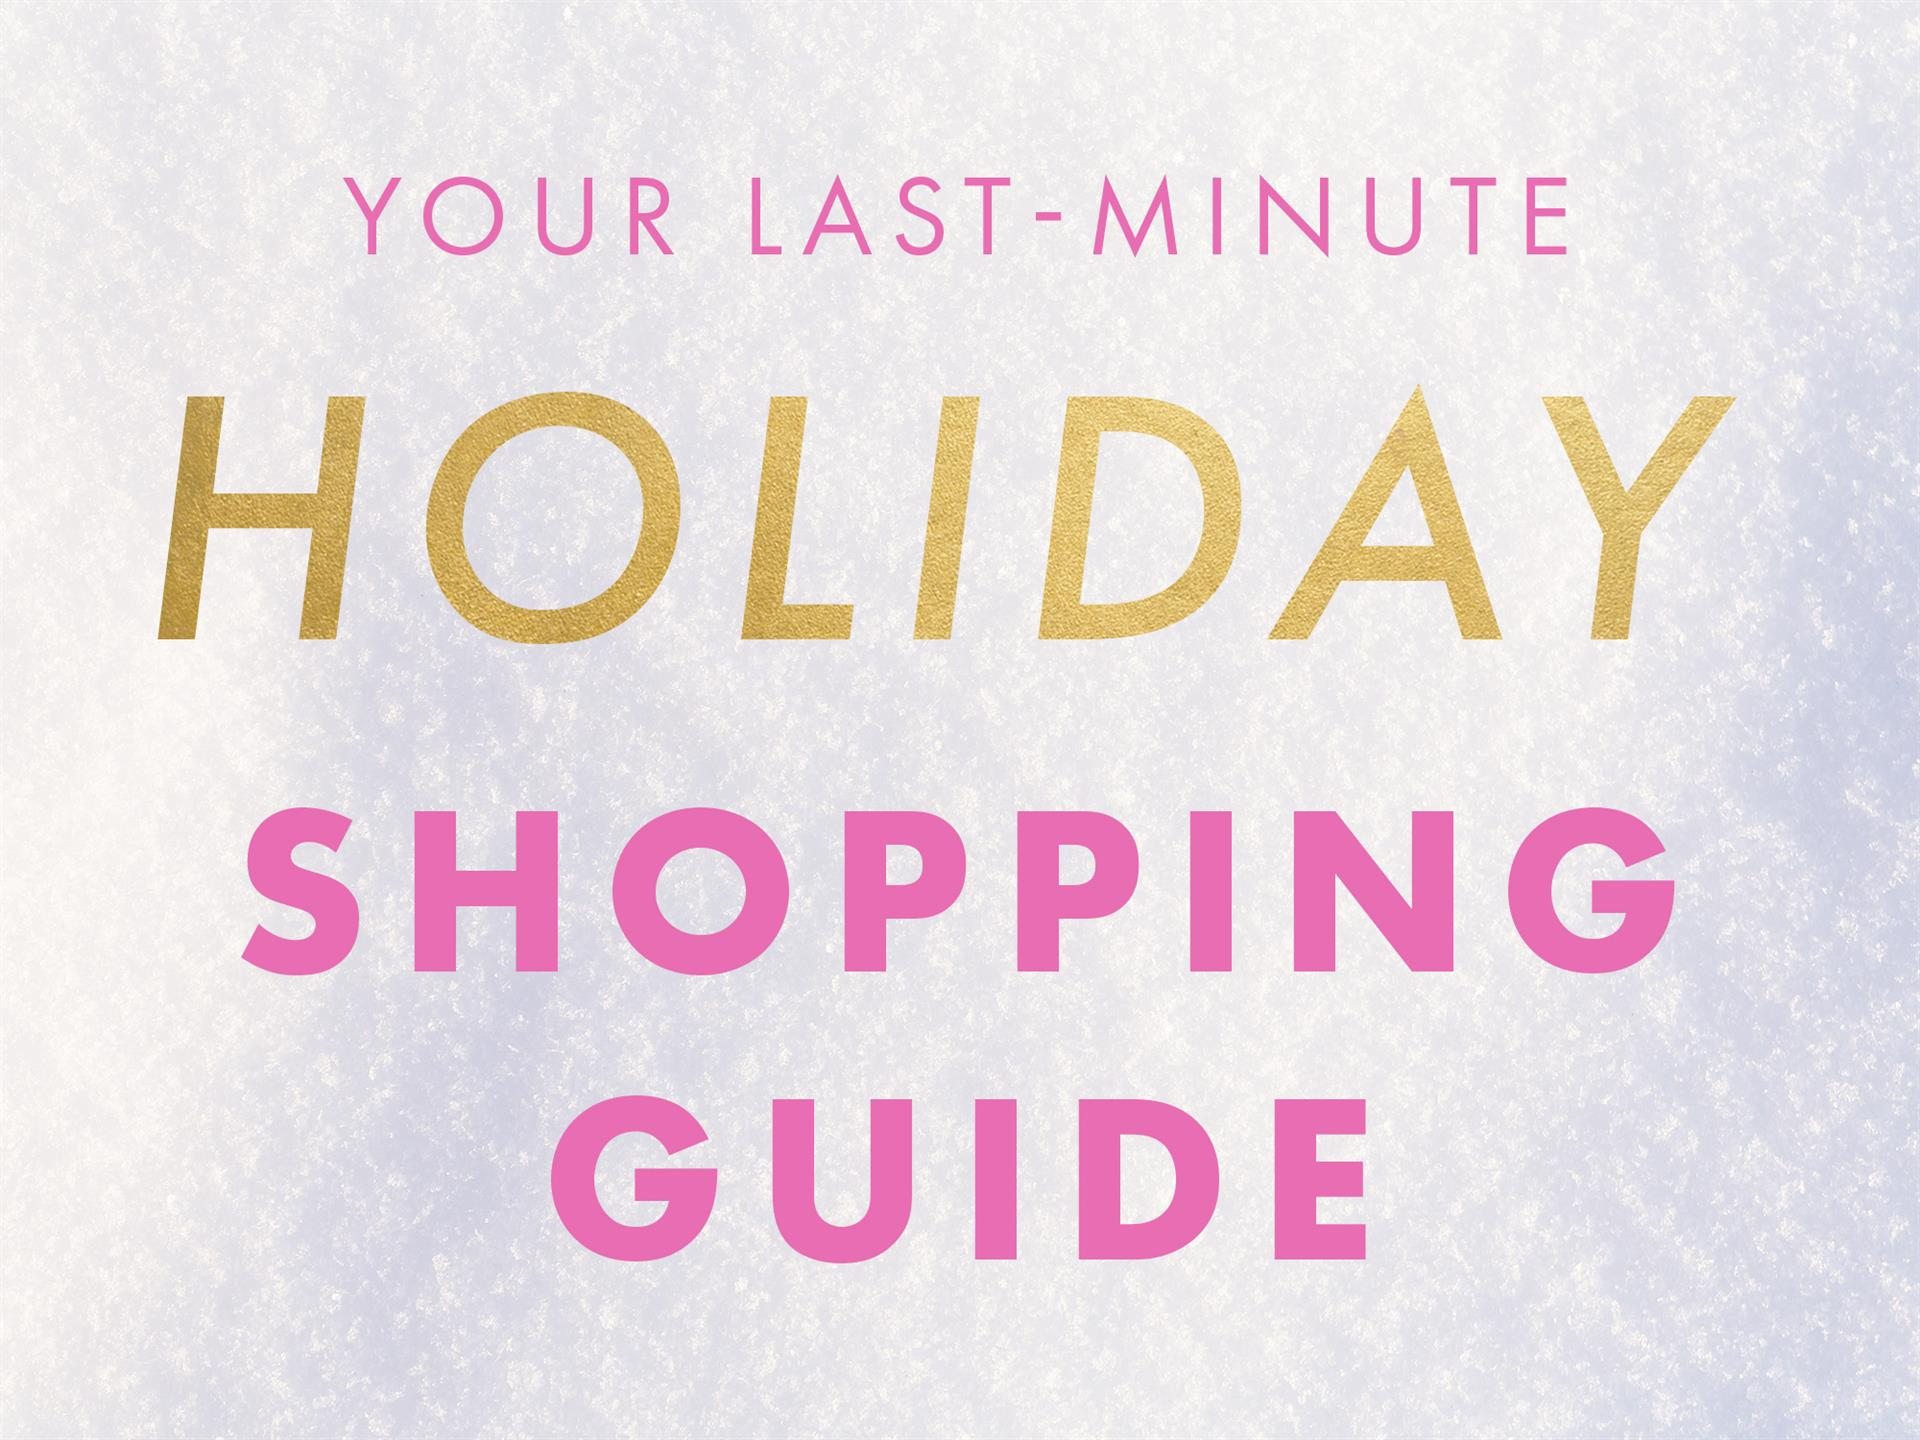 Your Last-Minute Holiday Shopping Guide